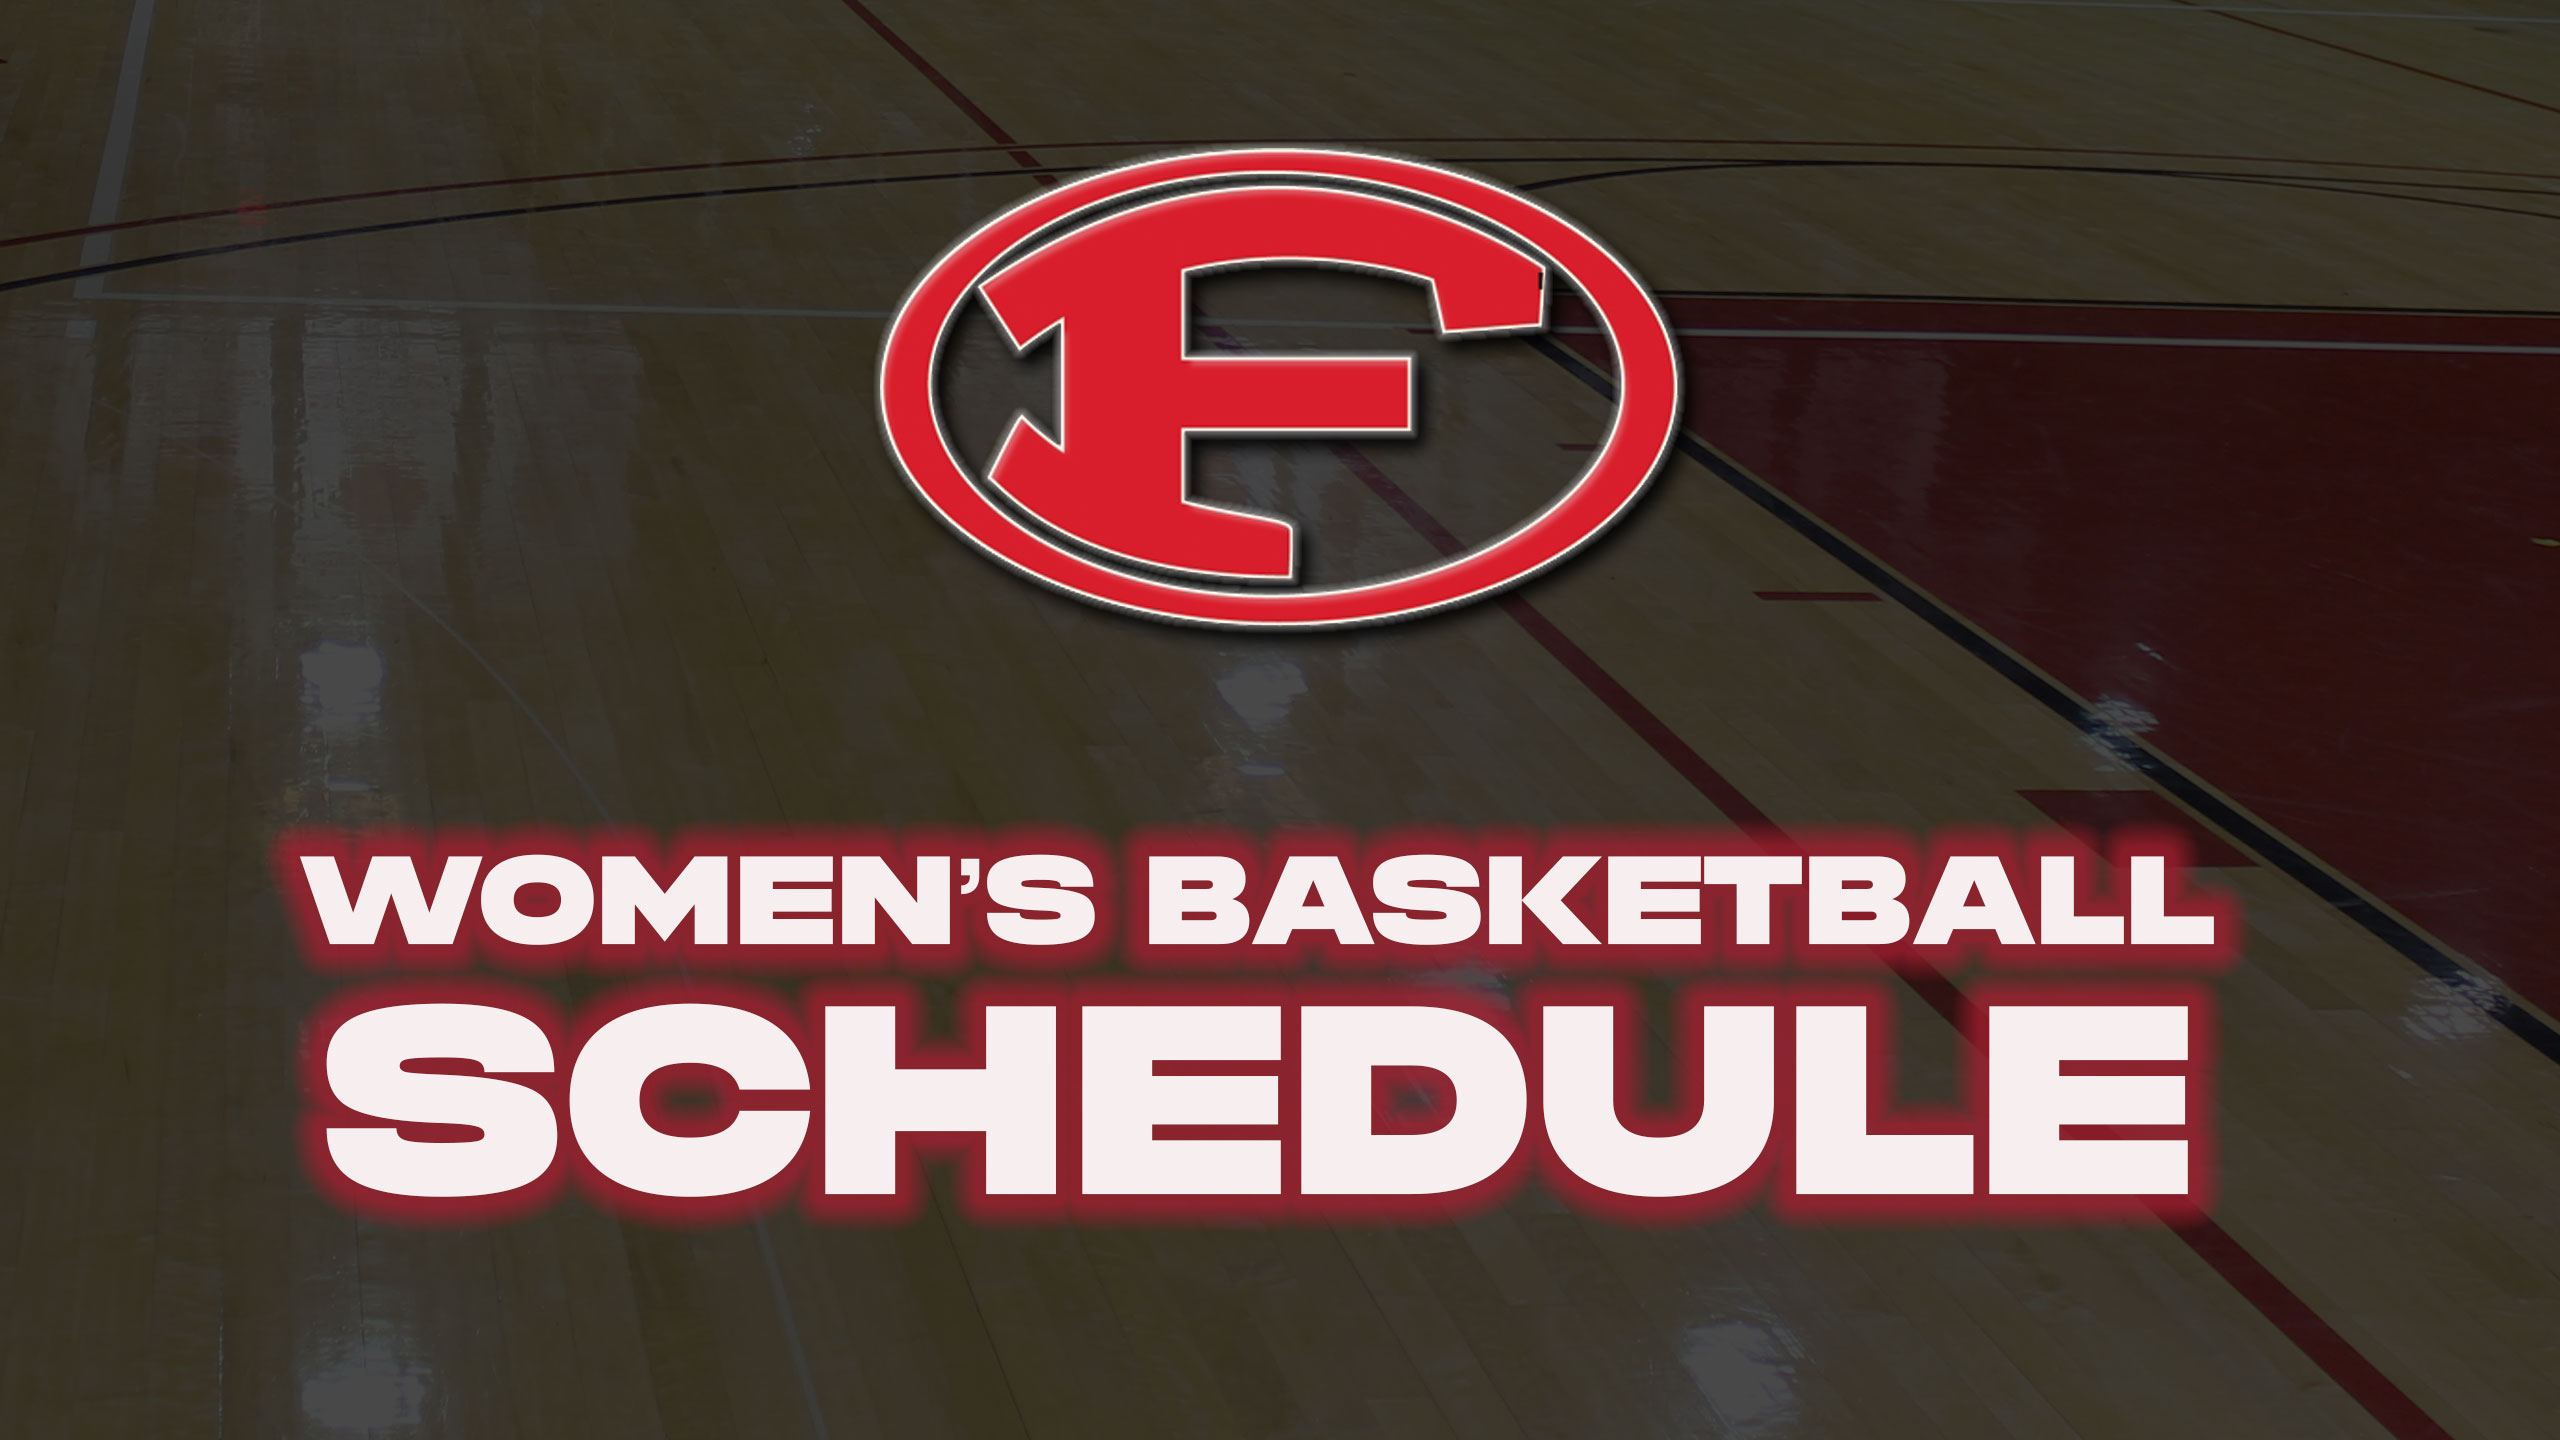 F in red and in a circle. Basketball court as backdrop. Women's Basketball schedule in white text.